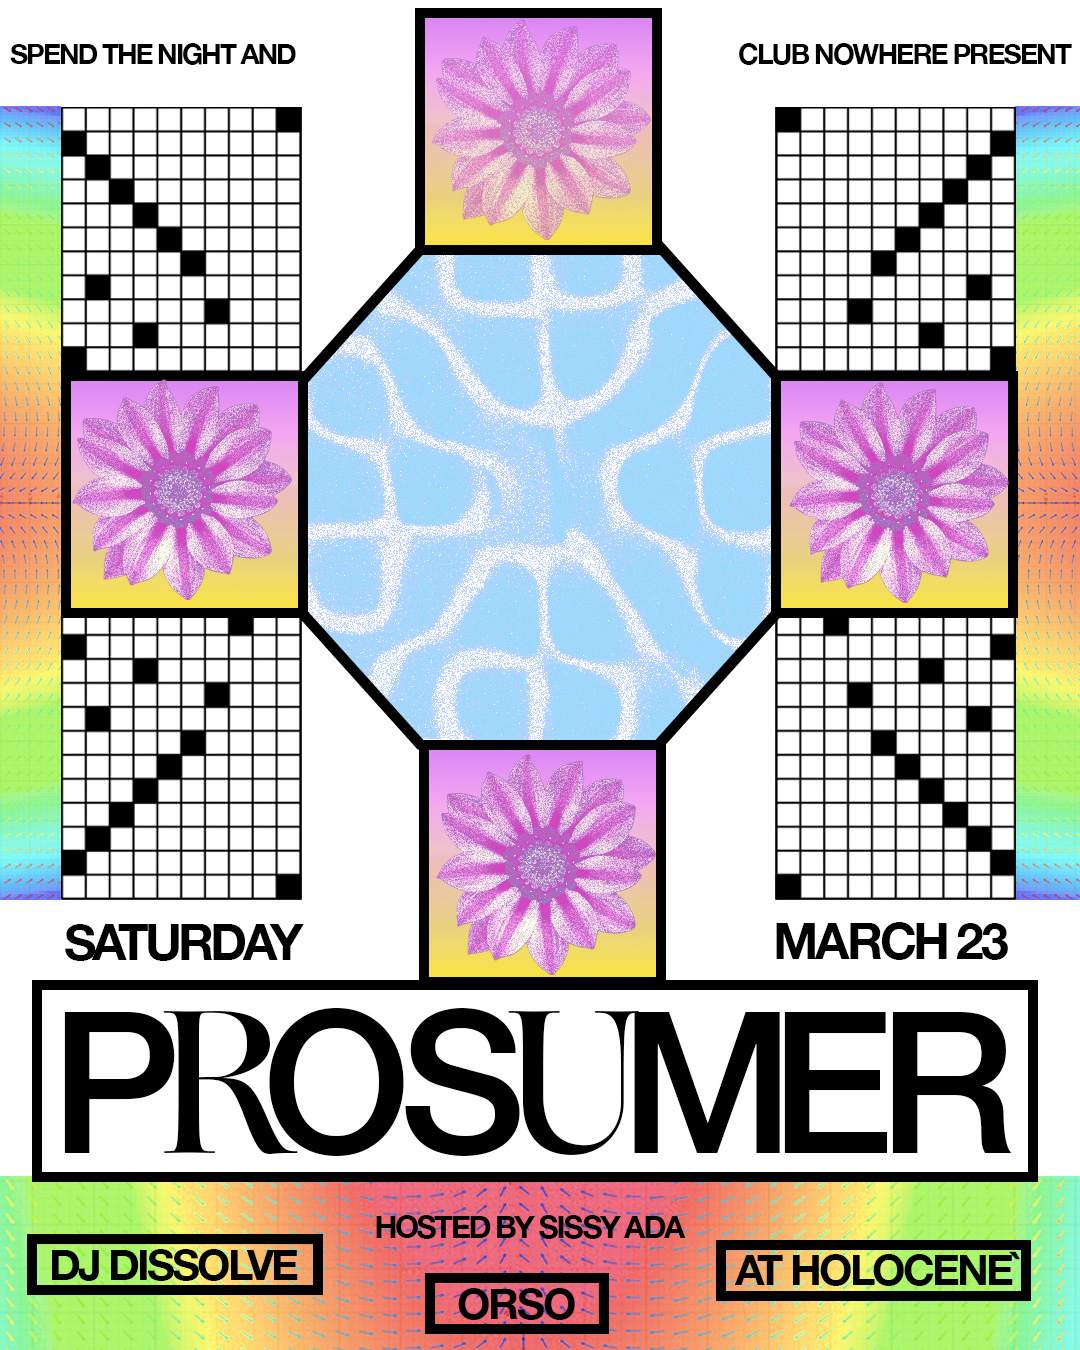 Spend The Night and Club Nowhere present: Prosumer, DJ DISSOLVE, ORSO, HOSTED BY SISSY ADA - フライヤー表